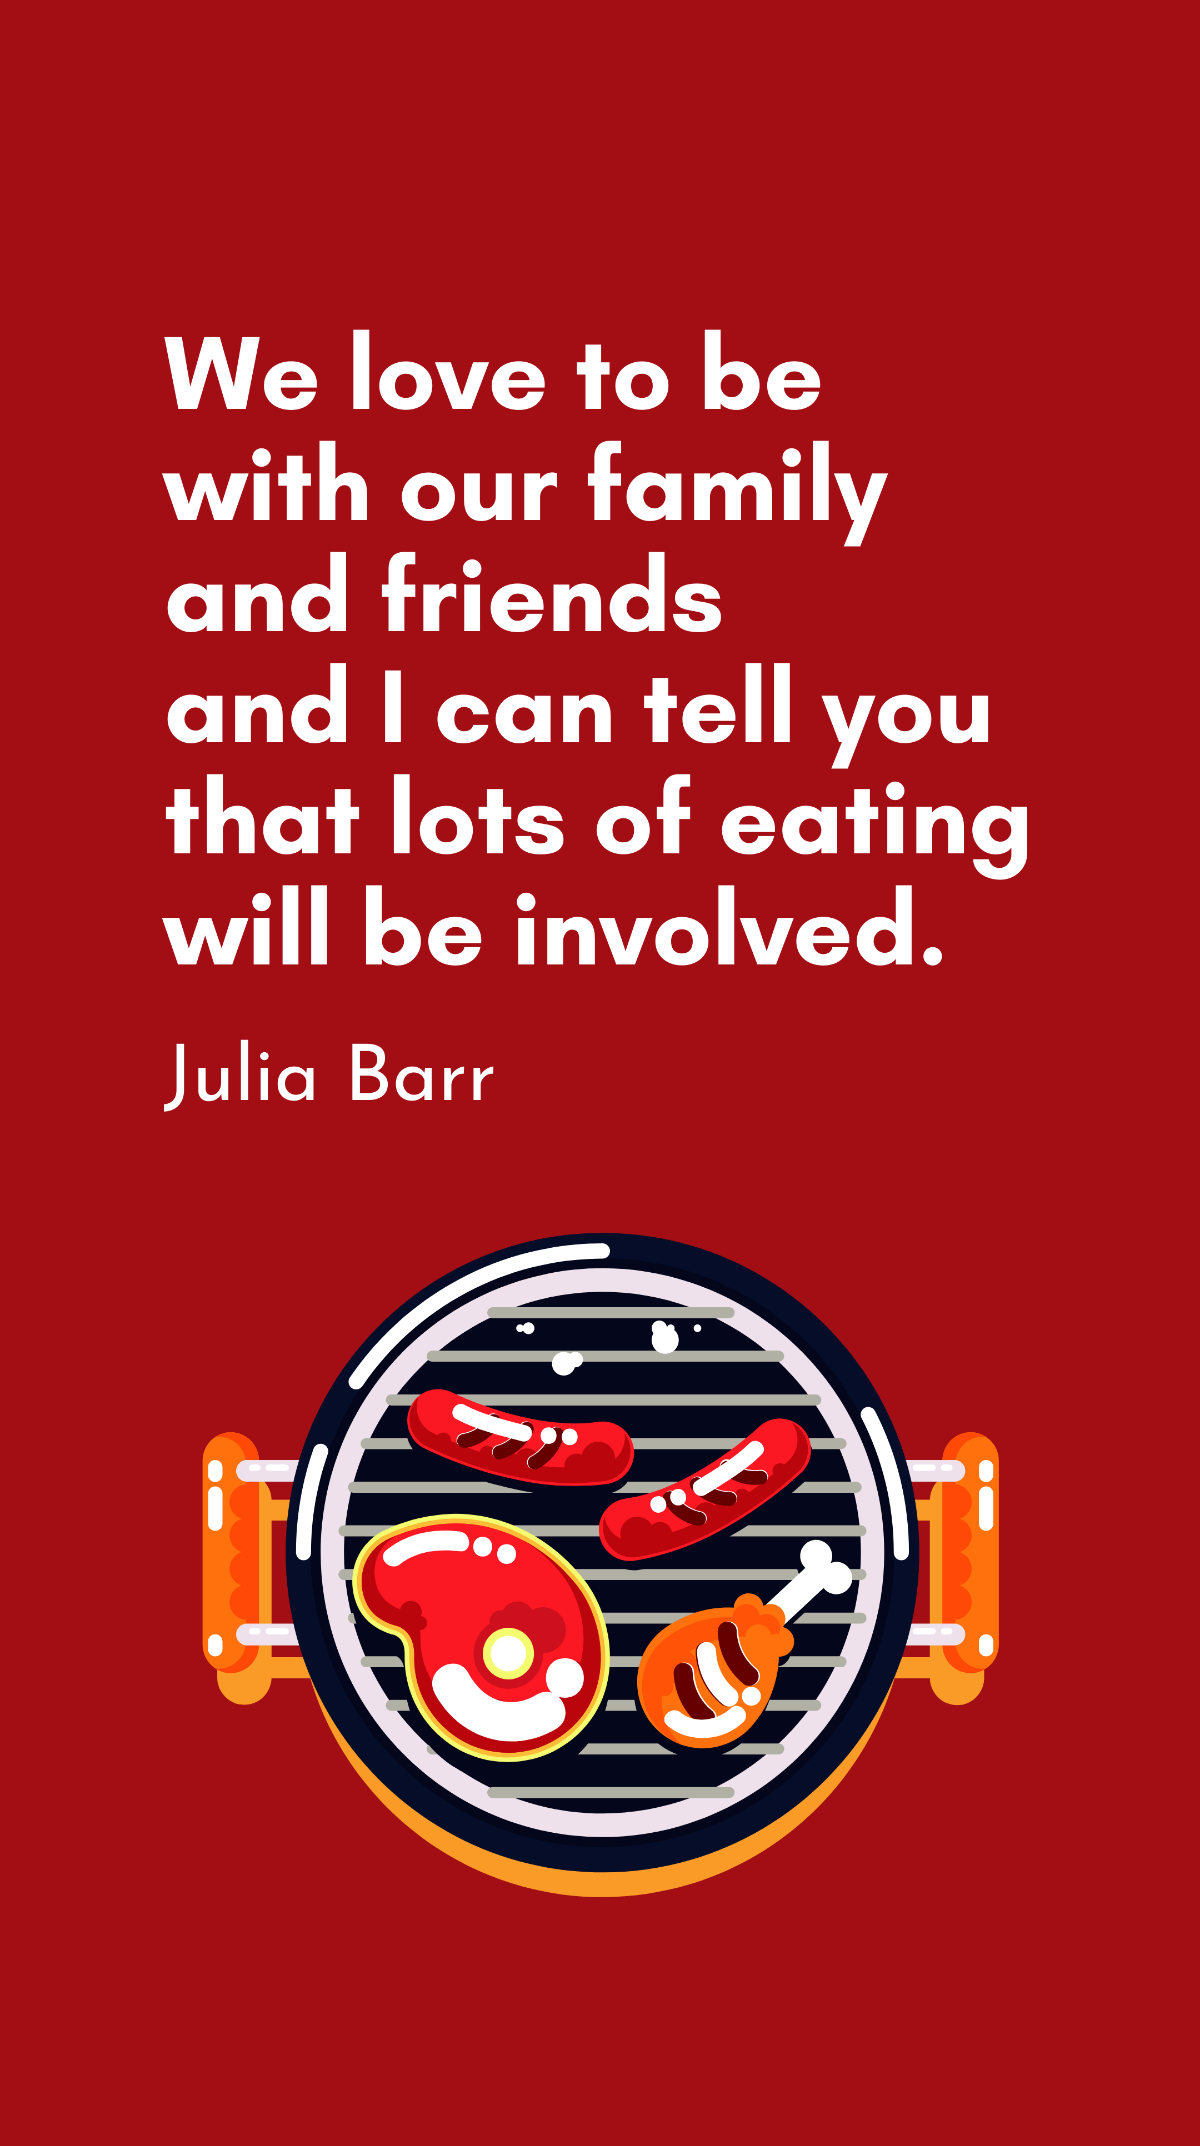 Free Julia Barr - We love to be with our family and friends and I can tell you that lots of eating will be involved. Template